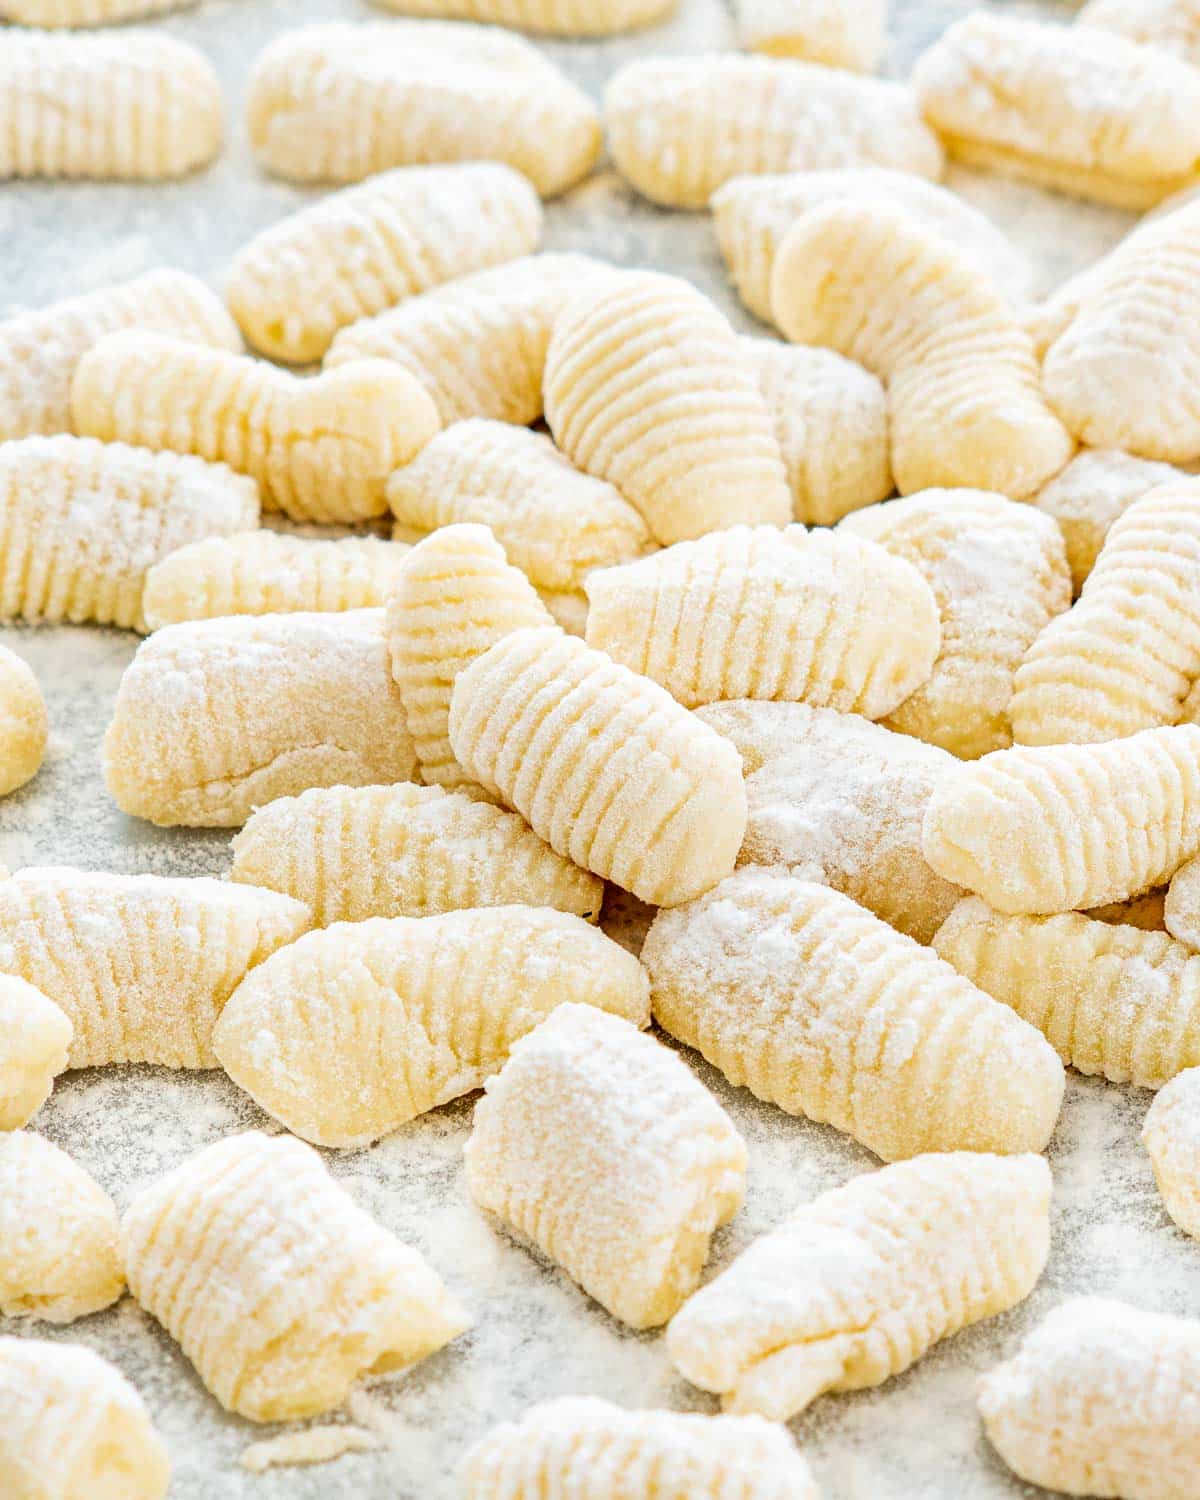 freshly made gnocchi on parchment dusted with flour